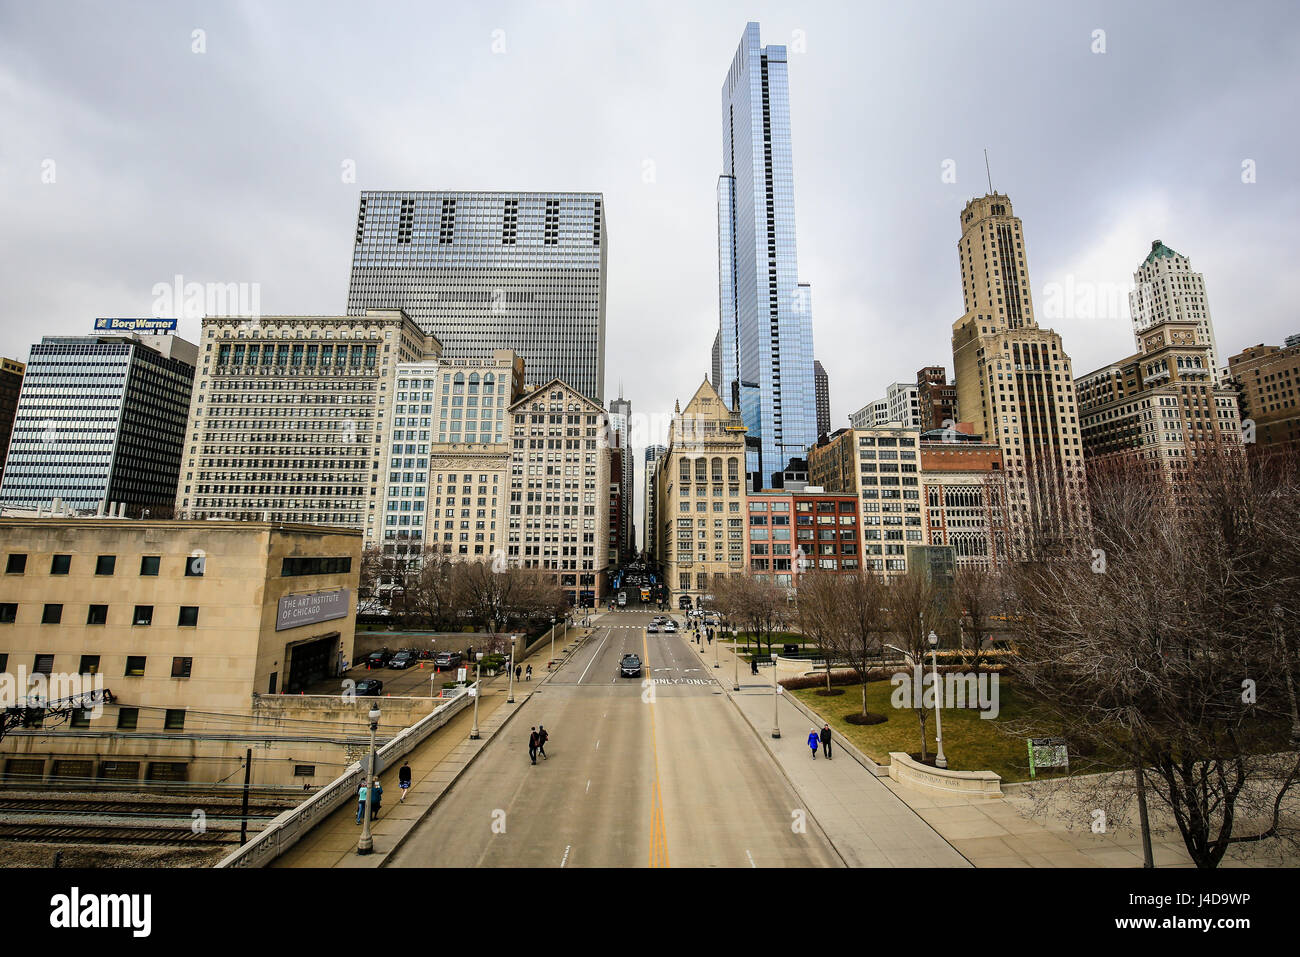 Chicago, View of the city, the loop, City, Chicago, Illinois, USA, North America, Stadtansicht, The Loop, City, Chicago, Illinois, USA, Nordamerika Stock Photo